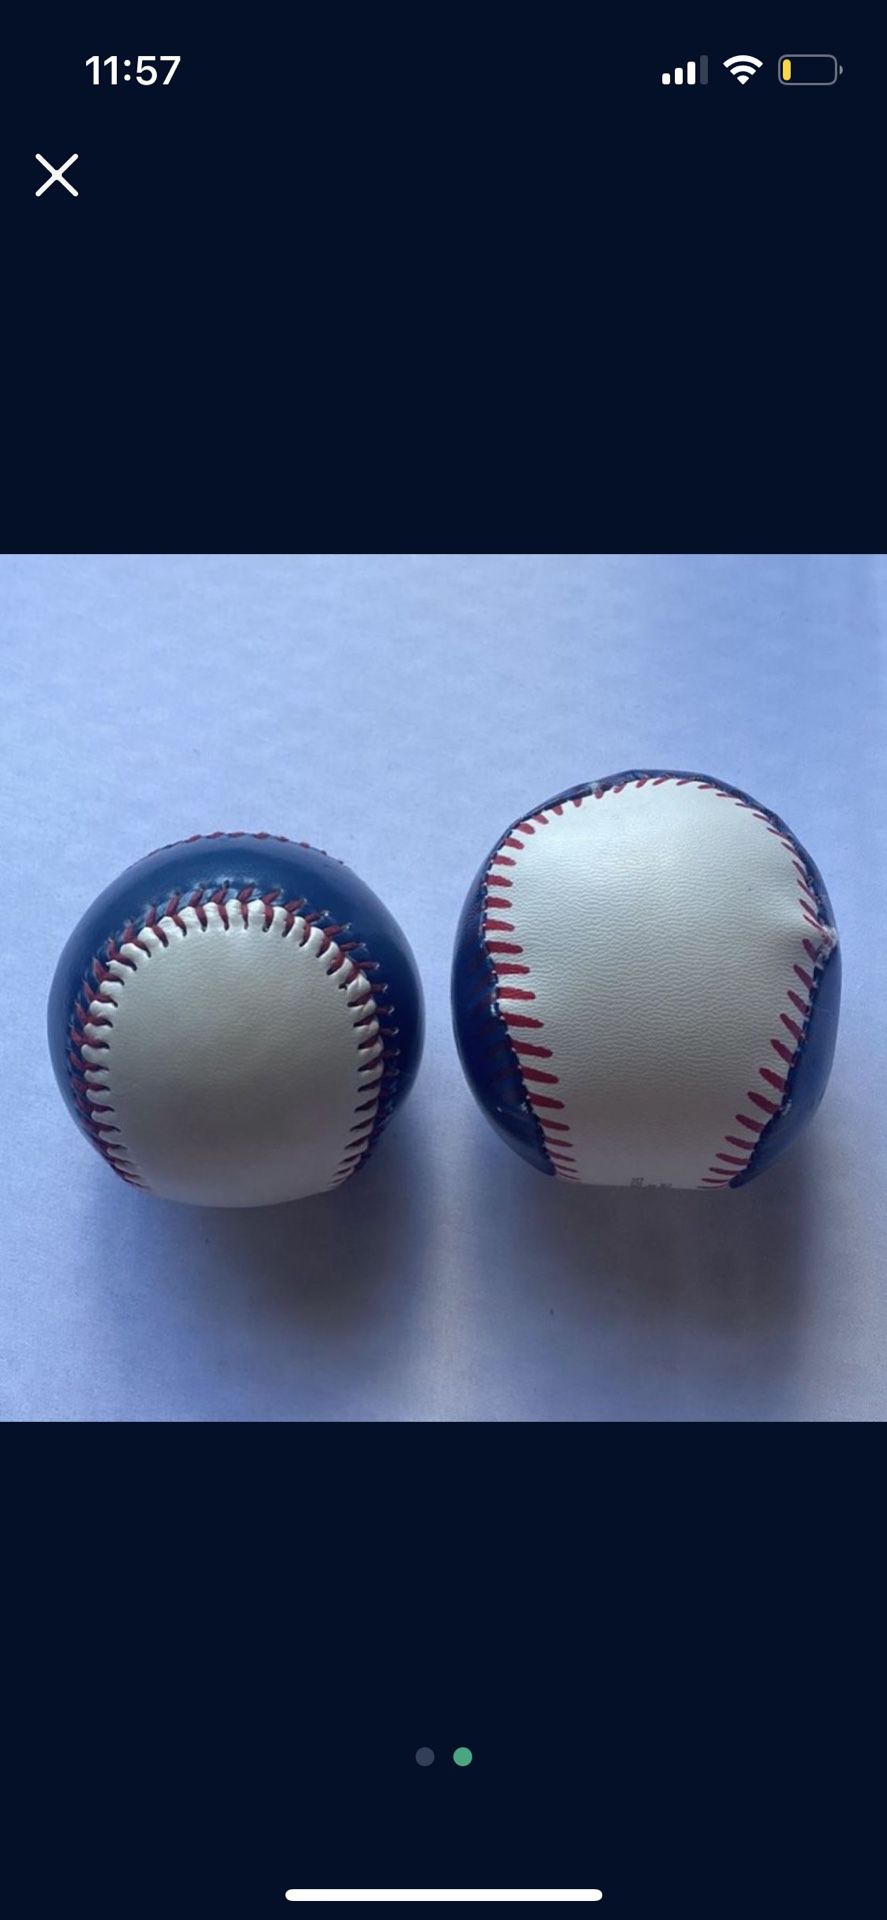 2 thunder baseballs (left one was caught during a game and right one is signed)